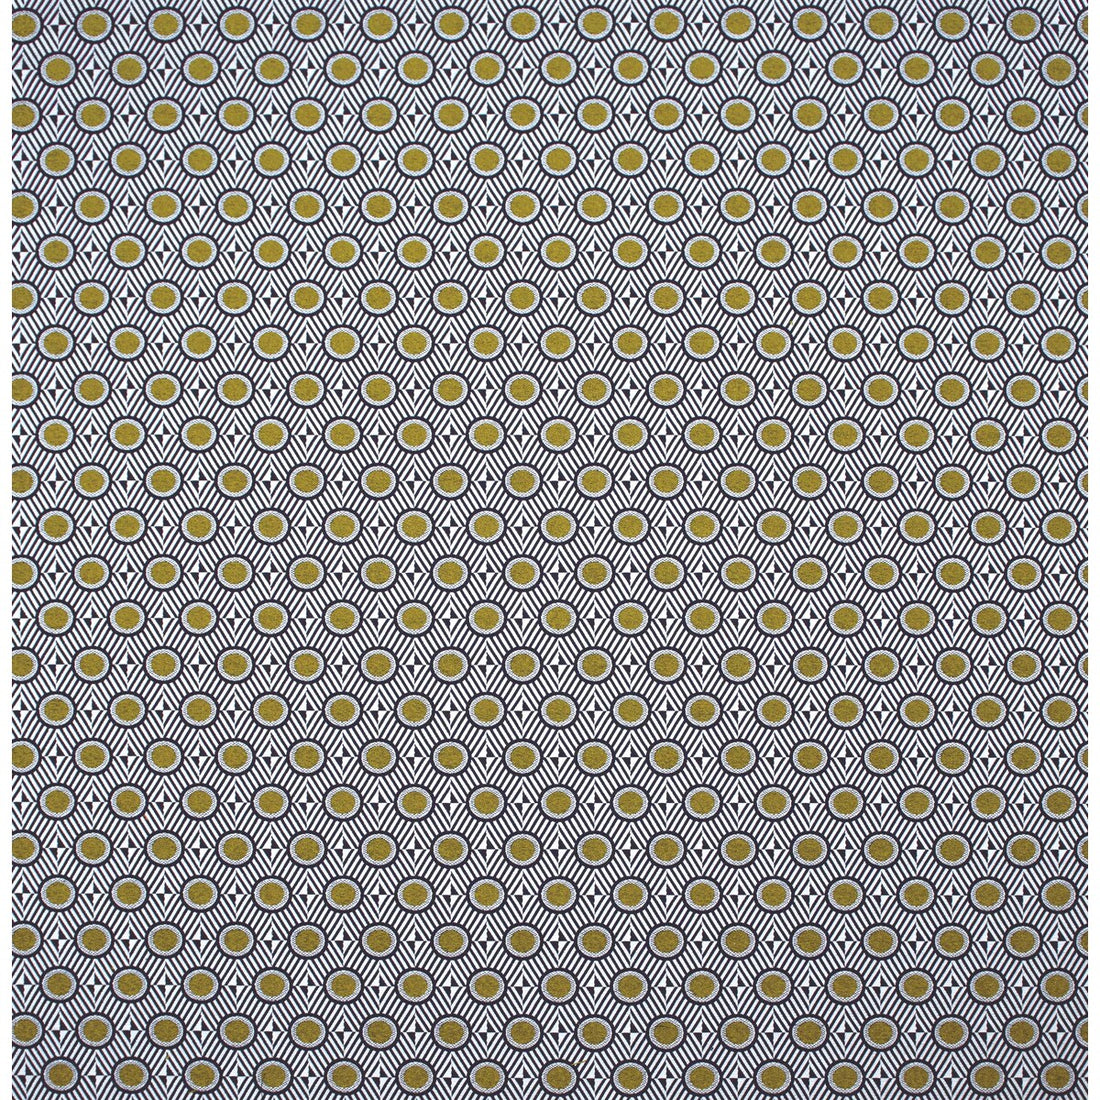 Morley fabric in verde color - pattern GDT5400.2.0 - by Gaston y Daniela in the Gaston Africalia collection